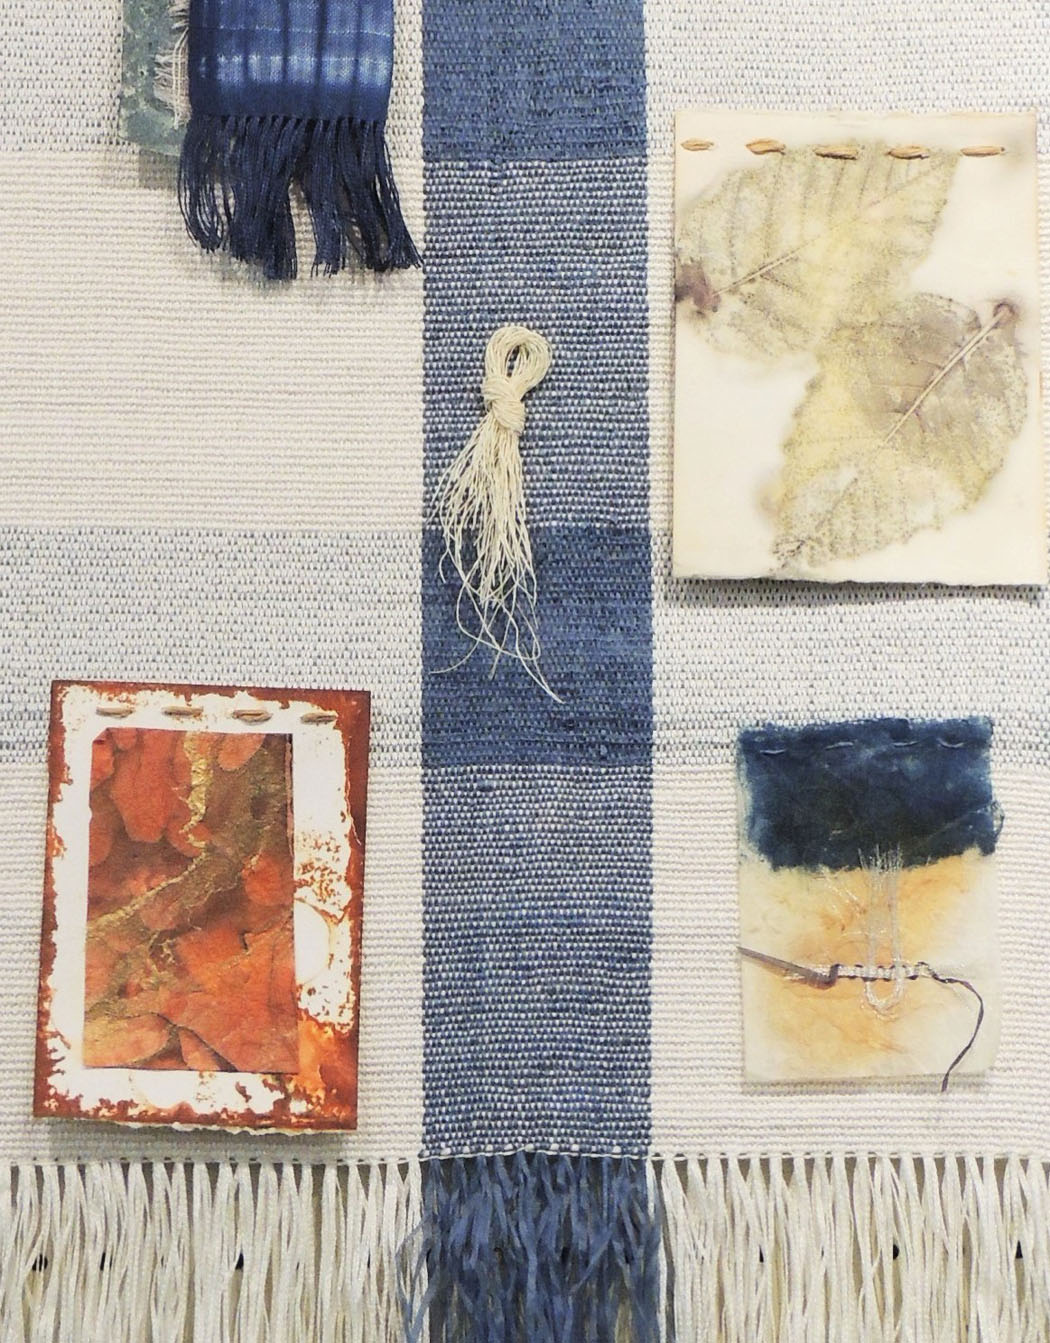 “Threads on Threads,” Kim Thompson’s handwoven piece with Japanese washi paper, linen tape, reeled silk, botanical printed paper, kapa, golf leaf paper, and raffia. photo by CTarleton